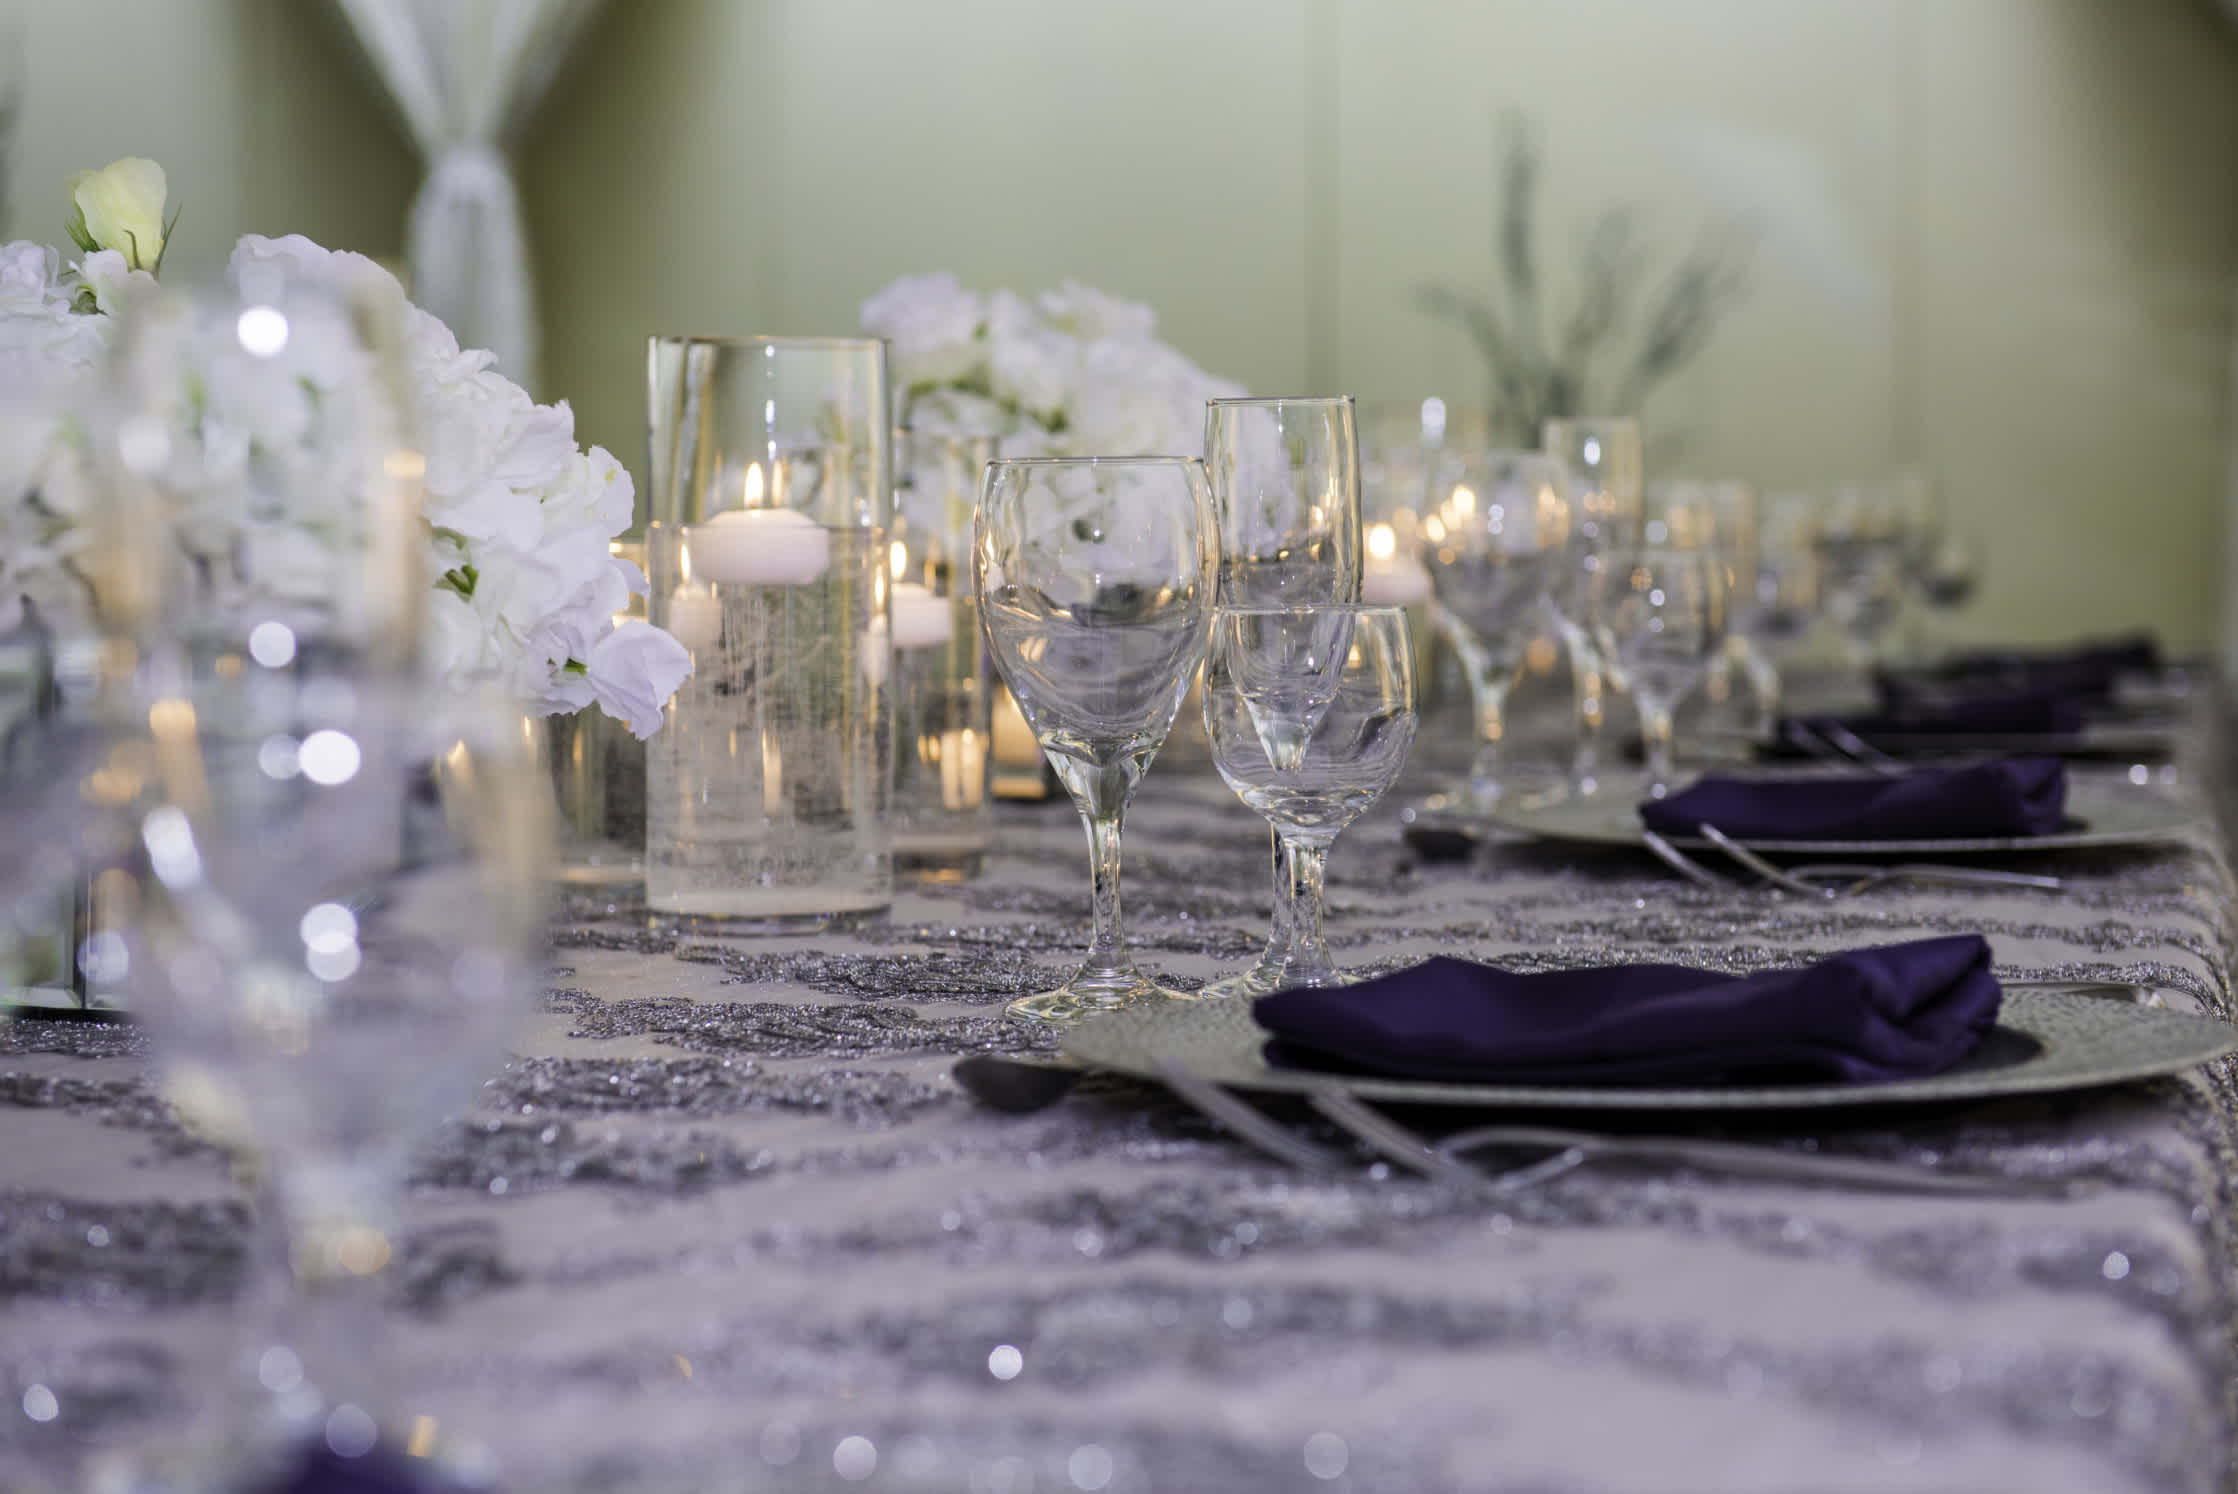 Table setting for a wedding with purple accents and warm glow from candles.